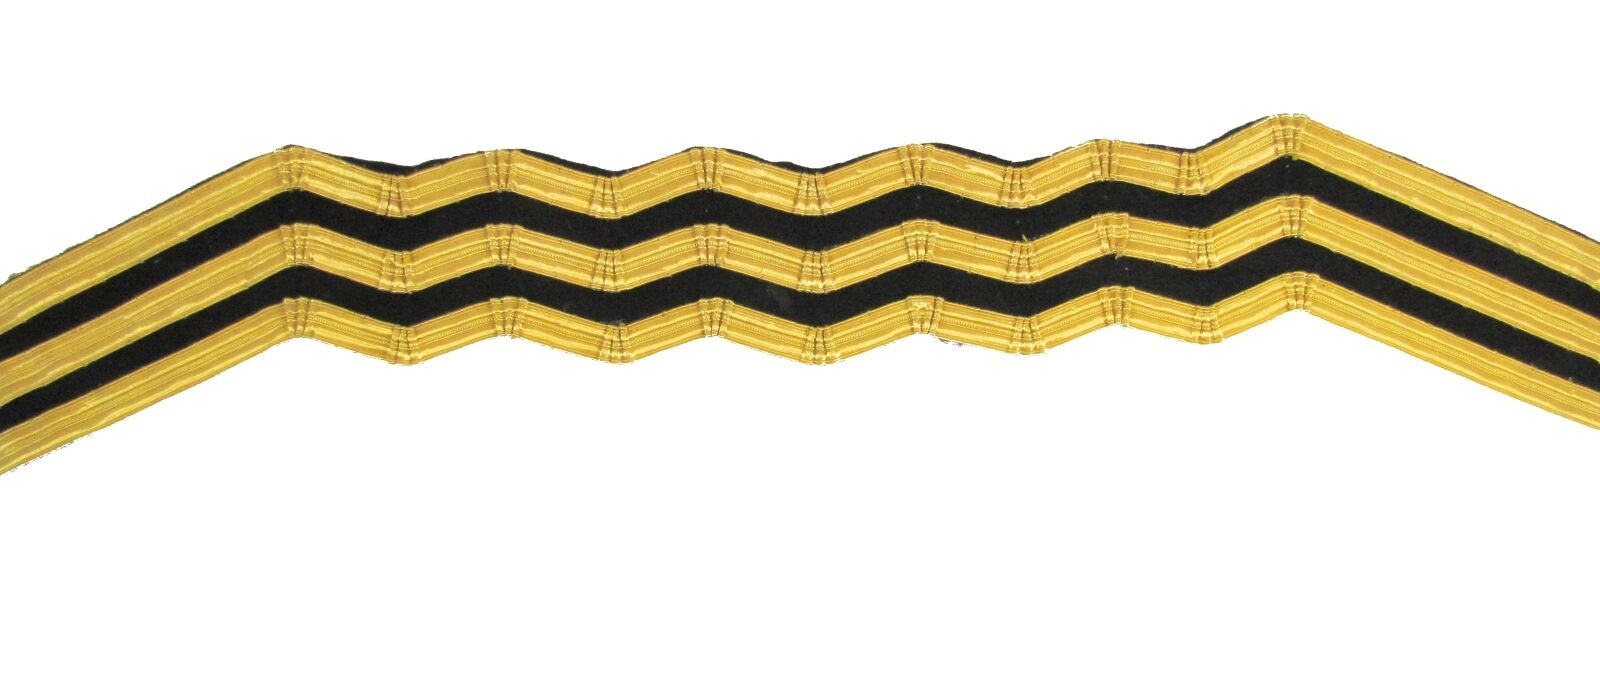 Sleeve Lace Bars Gold Wire Wavy for RNVR 3 Bars Sold Each